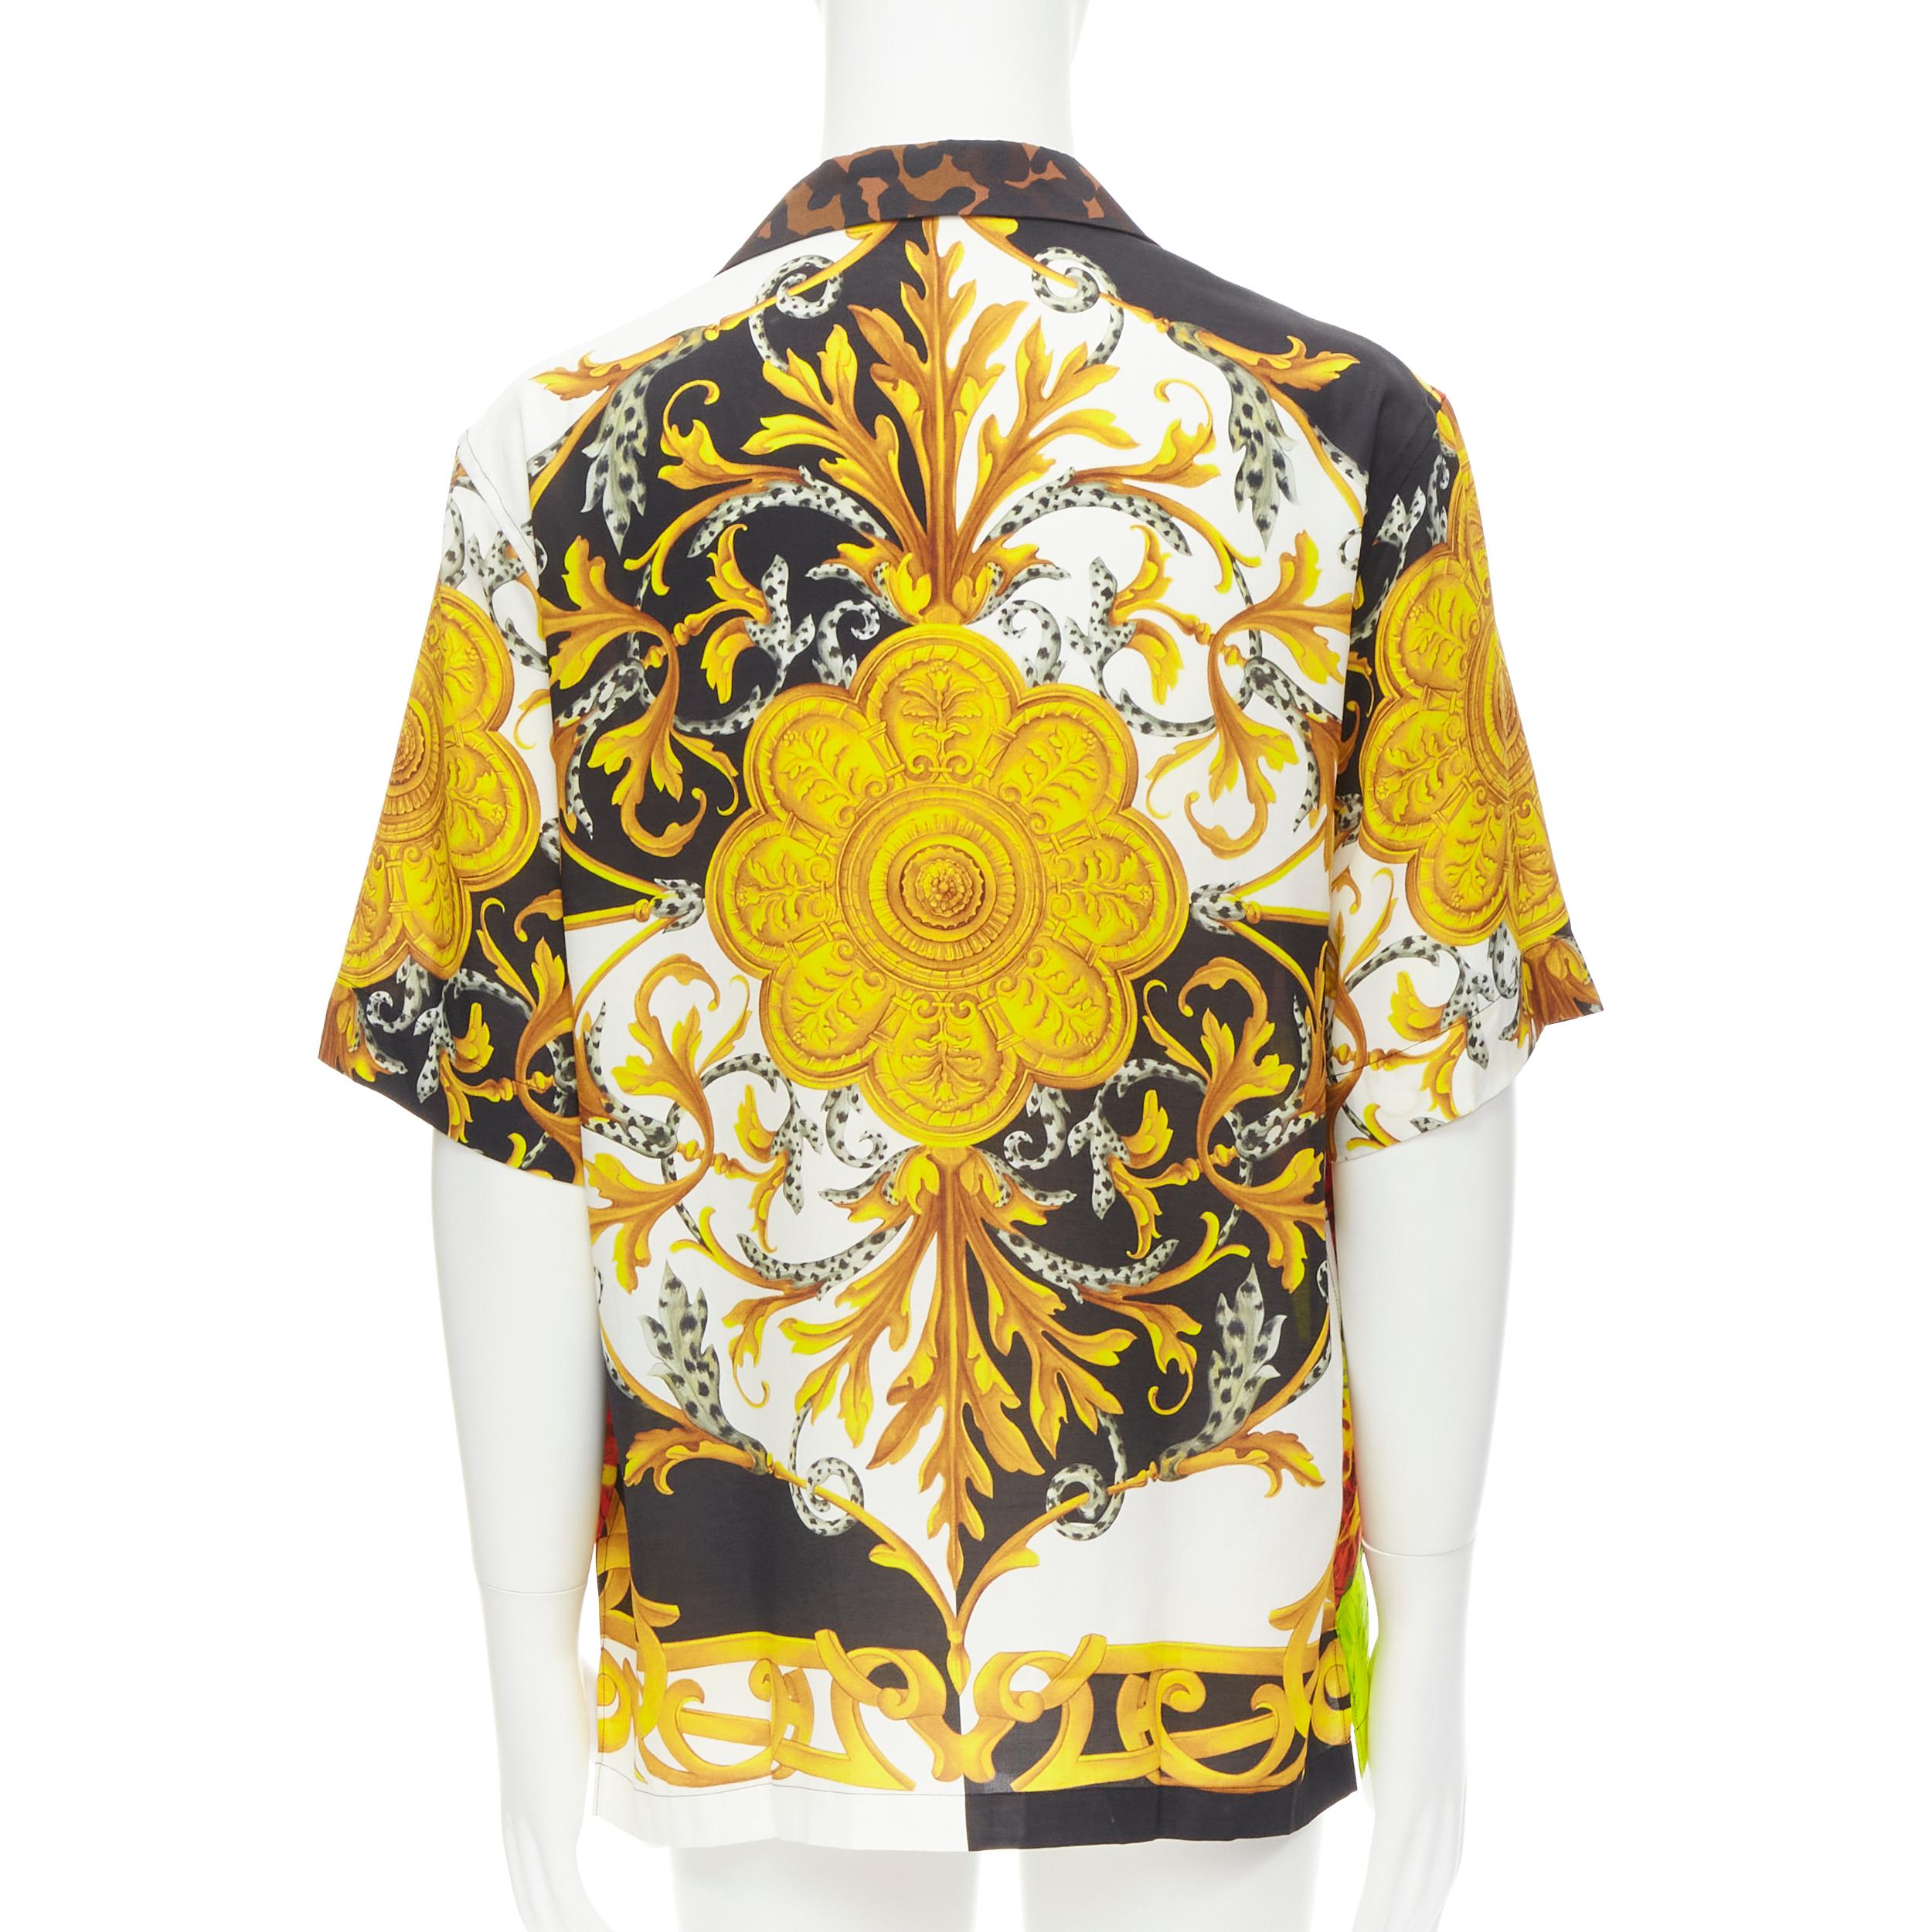 new VERSACE Rose Floral Barocco Acanthus print short sleeve shirt EU39 M 
Reference: TGAS/C00998 
Brand: Versace 
Designer: Donatella Versace 
Collection: Barocco Acanthus 
Material: Viscose 
Color: Mulitcolour 
Pattern: Floral 
Closure: Button